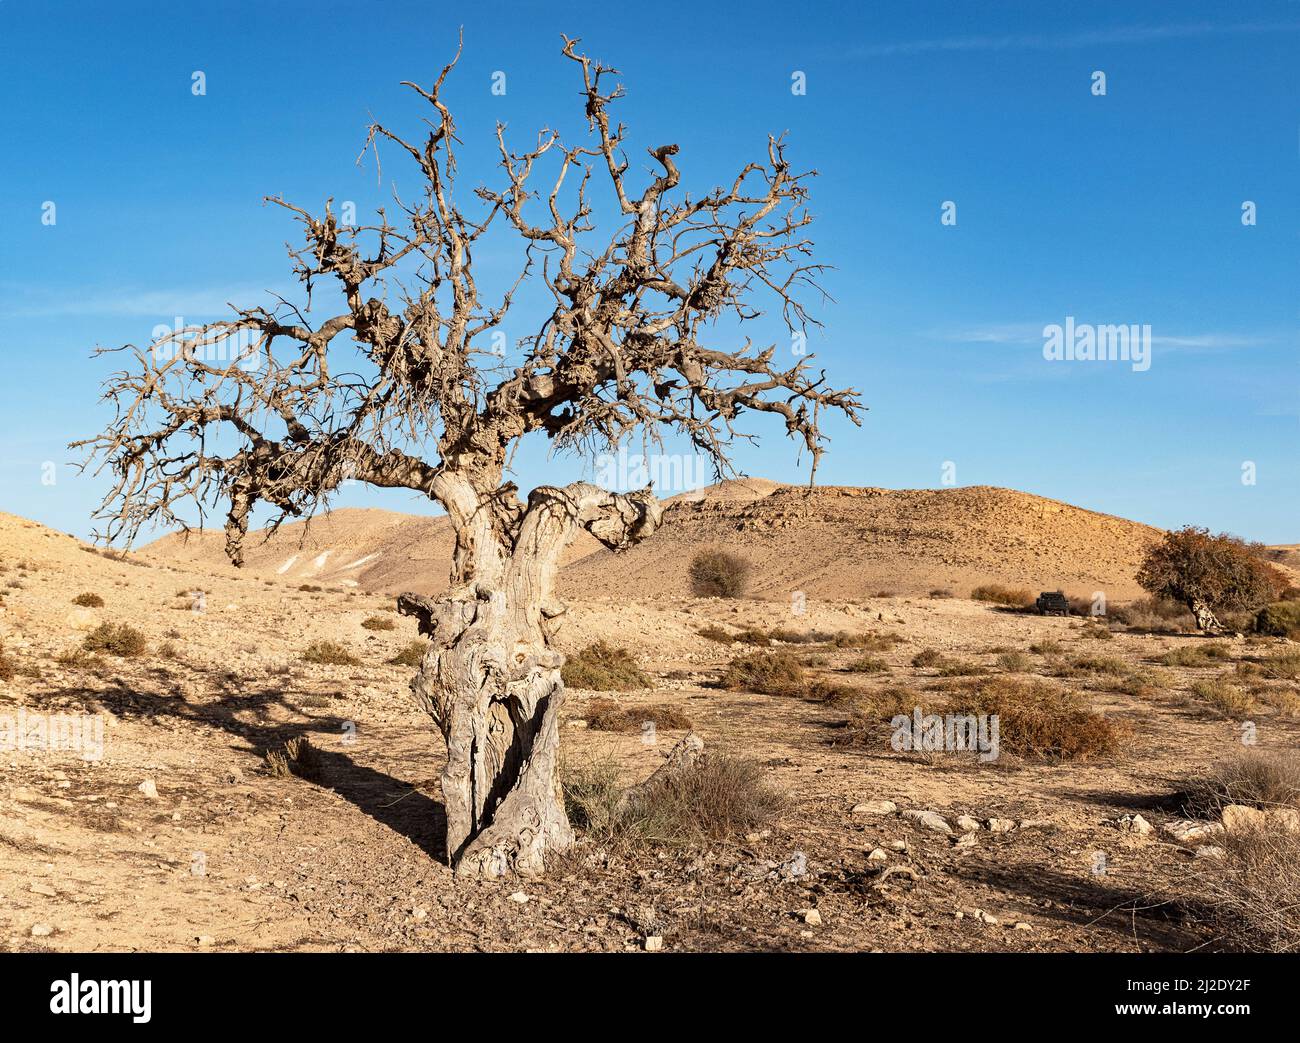 large dead Atlanic pistachio Pistacia atlantica tree in Nahal Wadi Lotz in the Negev in Israel with live trees in the stream bed in the background alo Stock Photo